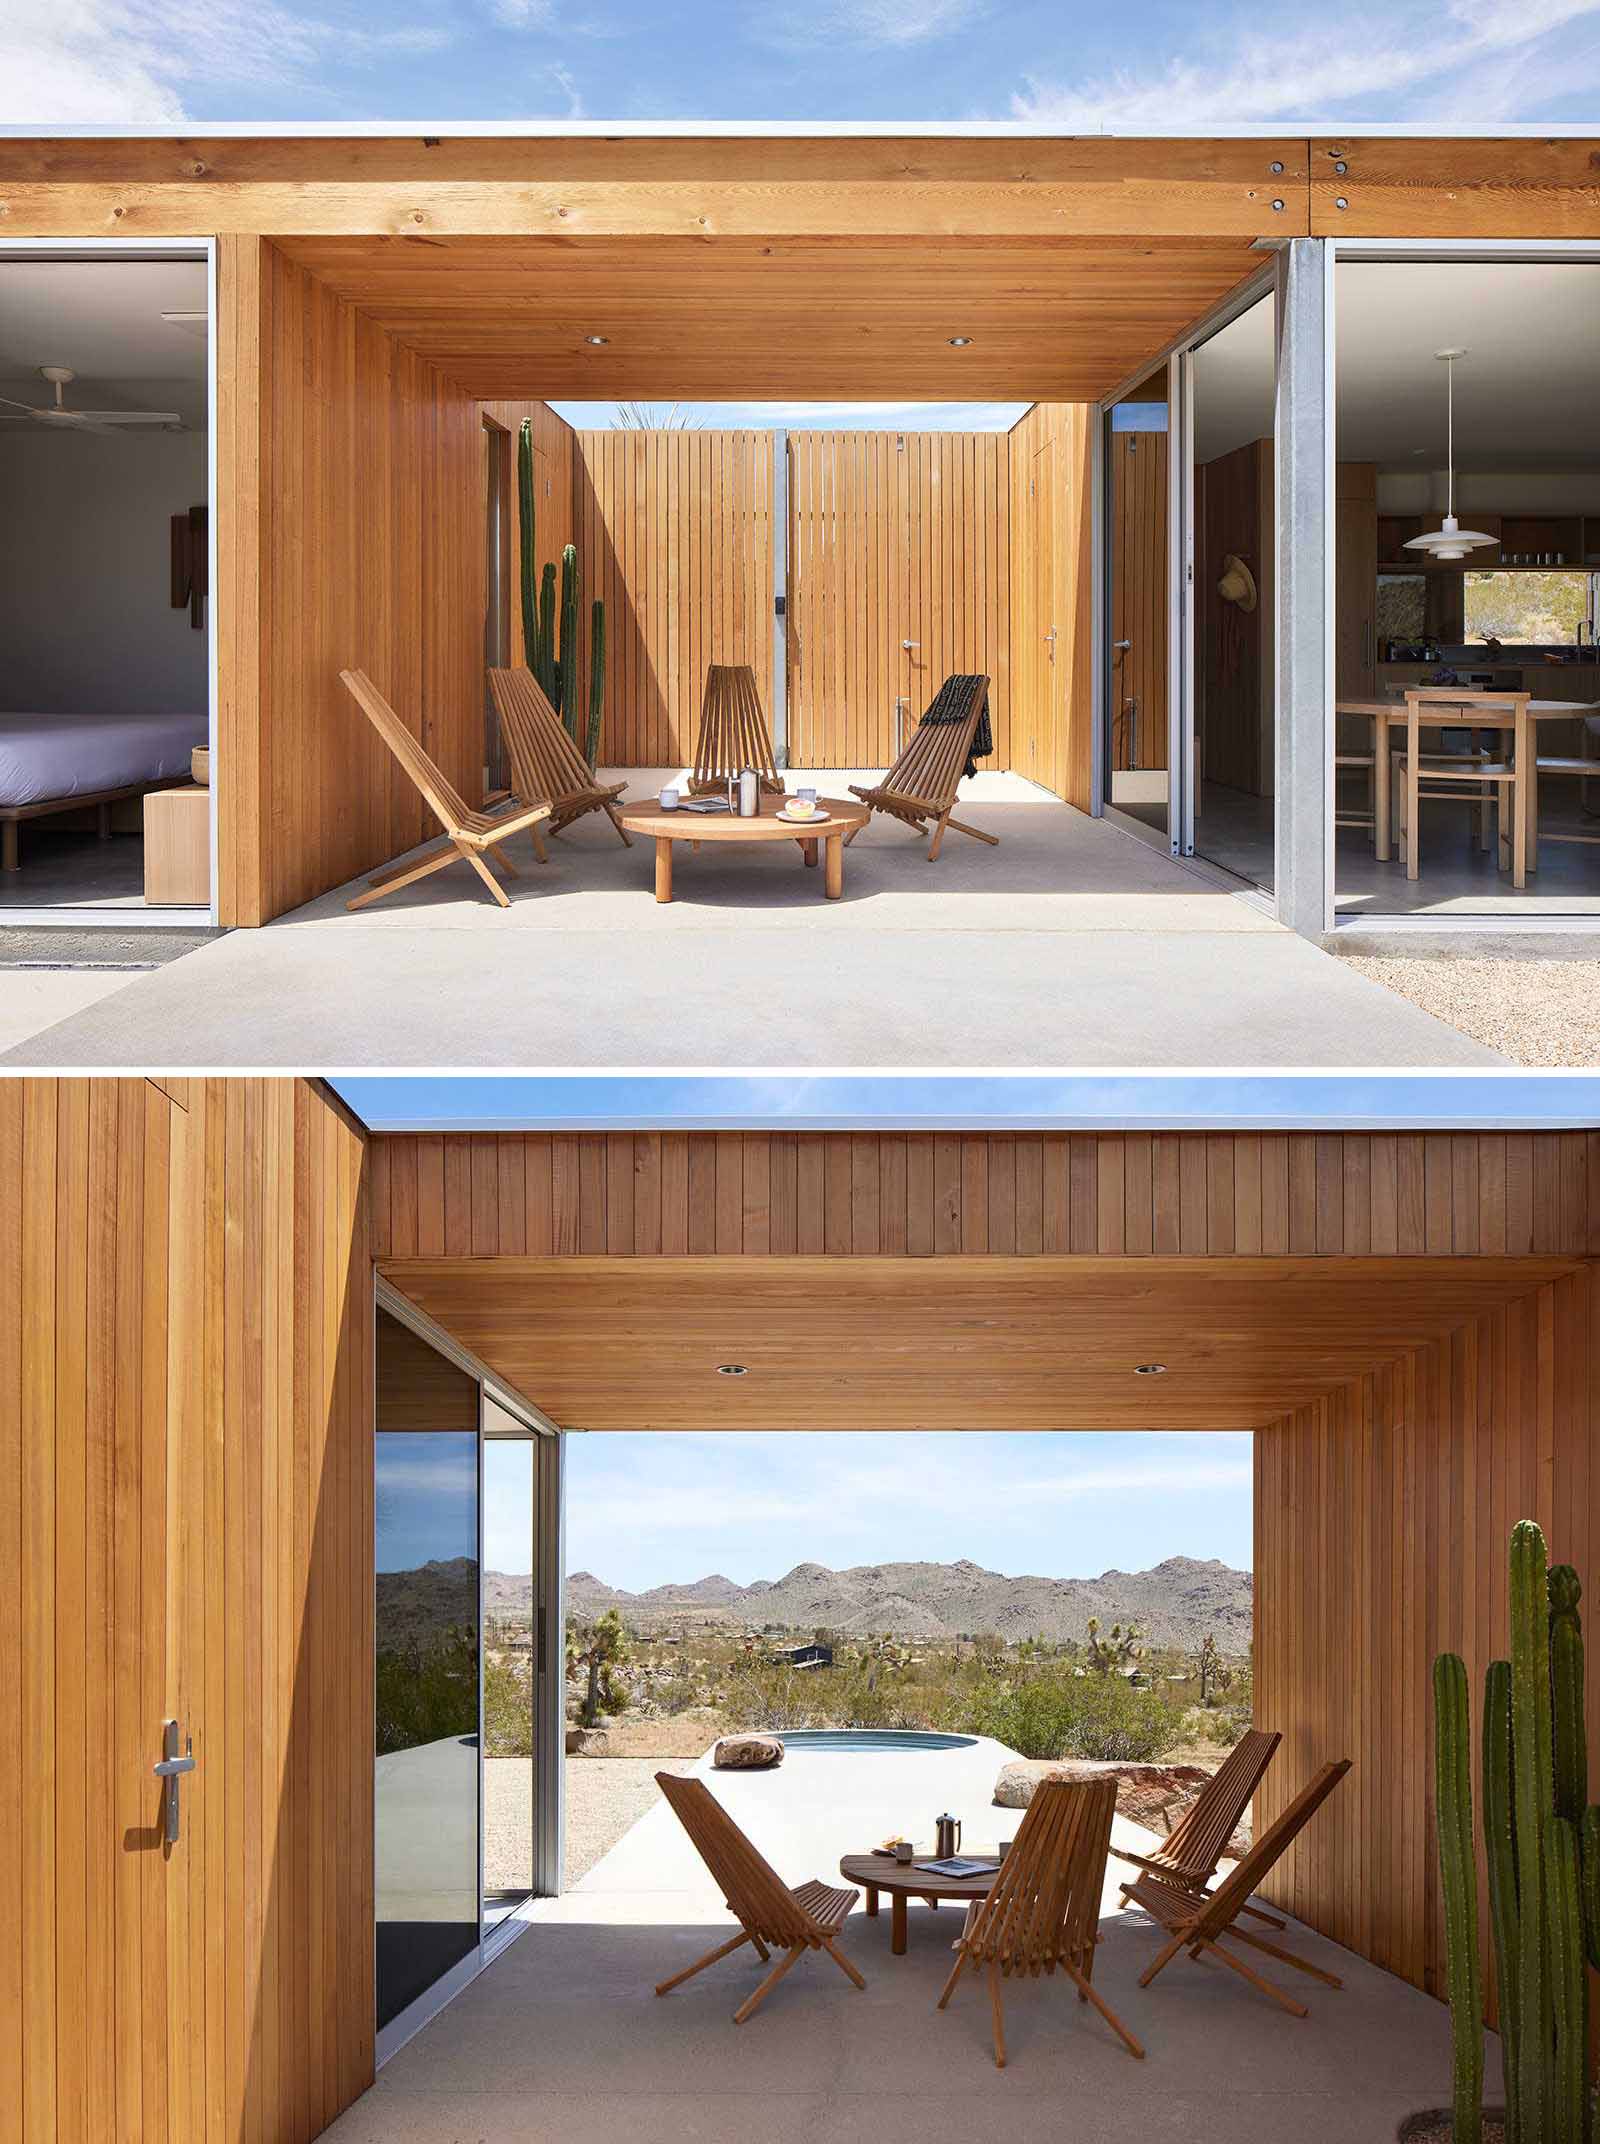 A desert home with wood siding that blends into its surrounding, includes a covered breezeway.